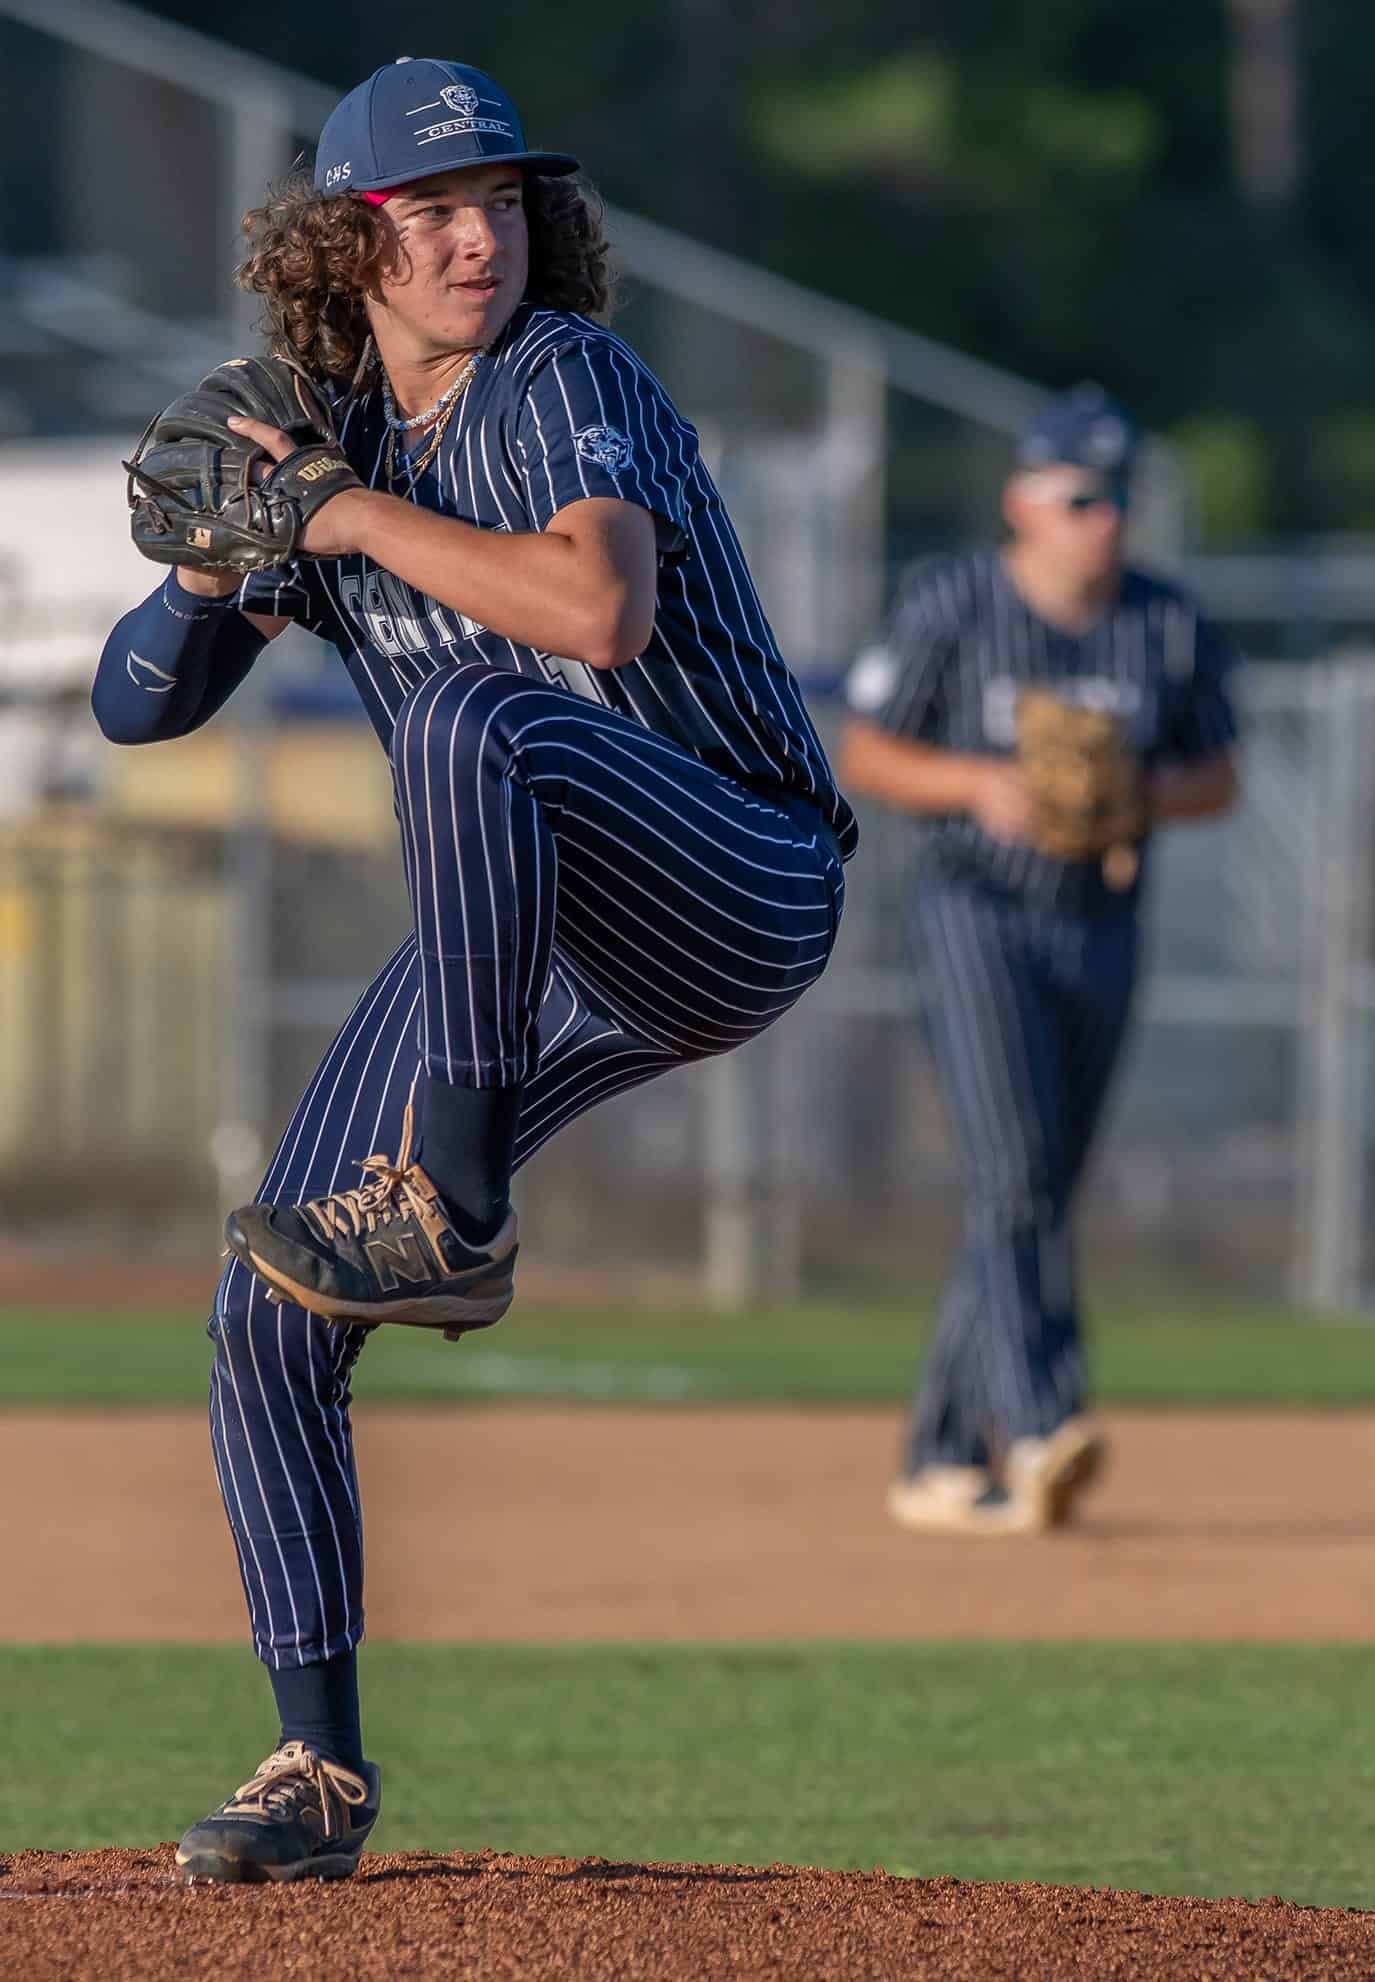 Ryan Engley started the home game for Central High Friday versus Hernando High. Photo by [Joseph Dicristofalo]